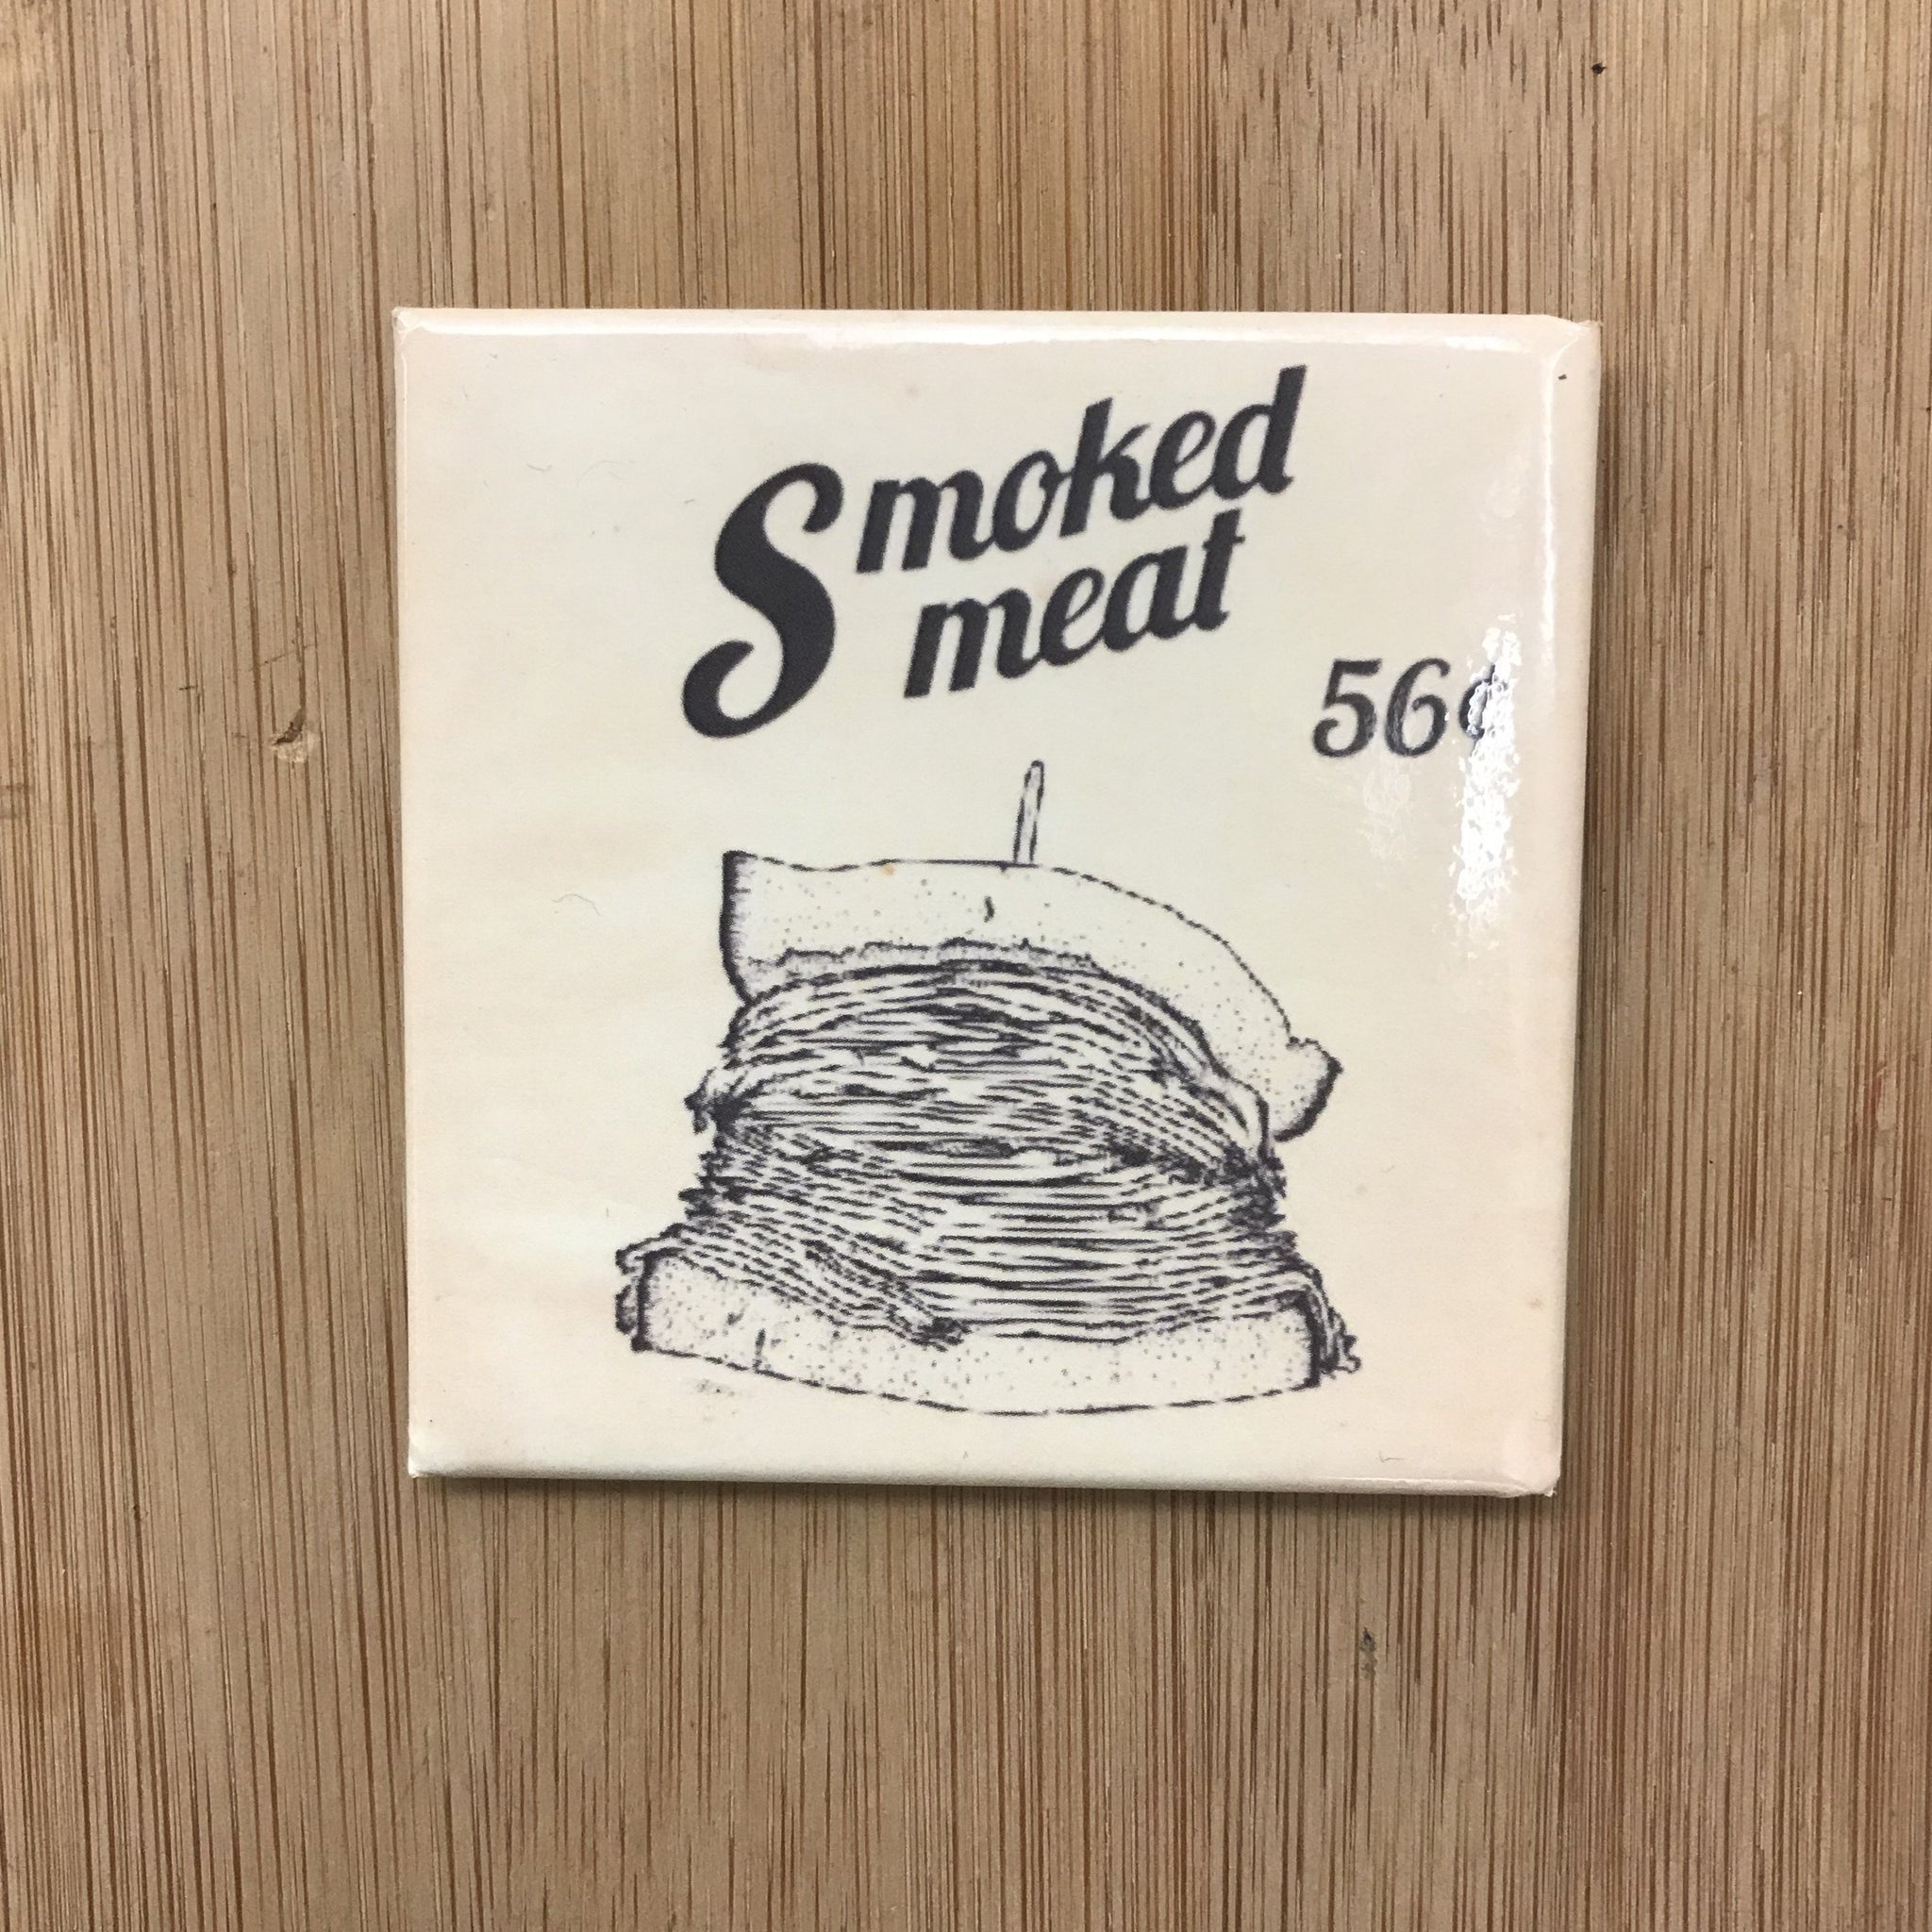 Aimant Smoked meat 56